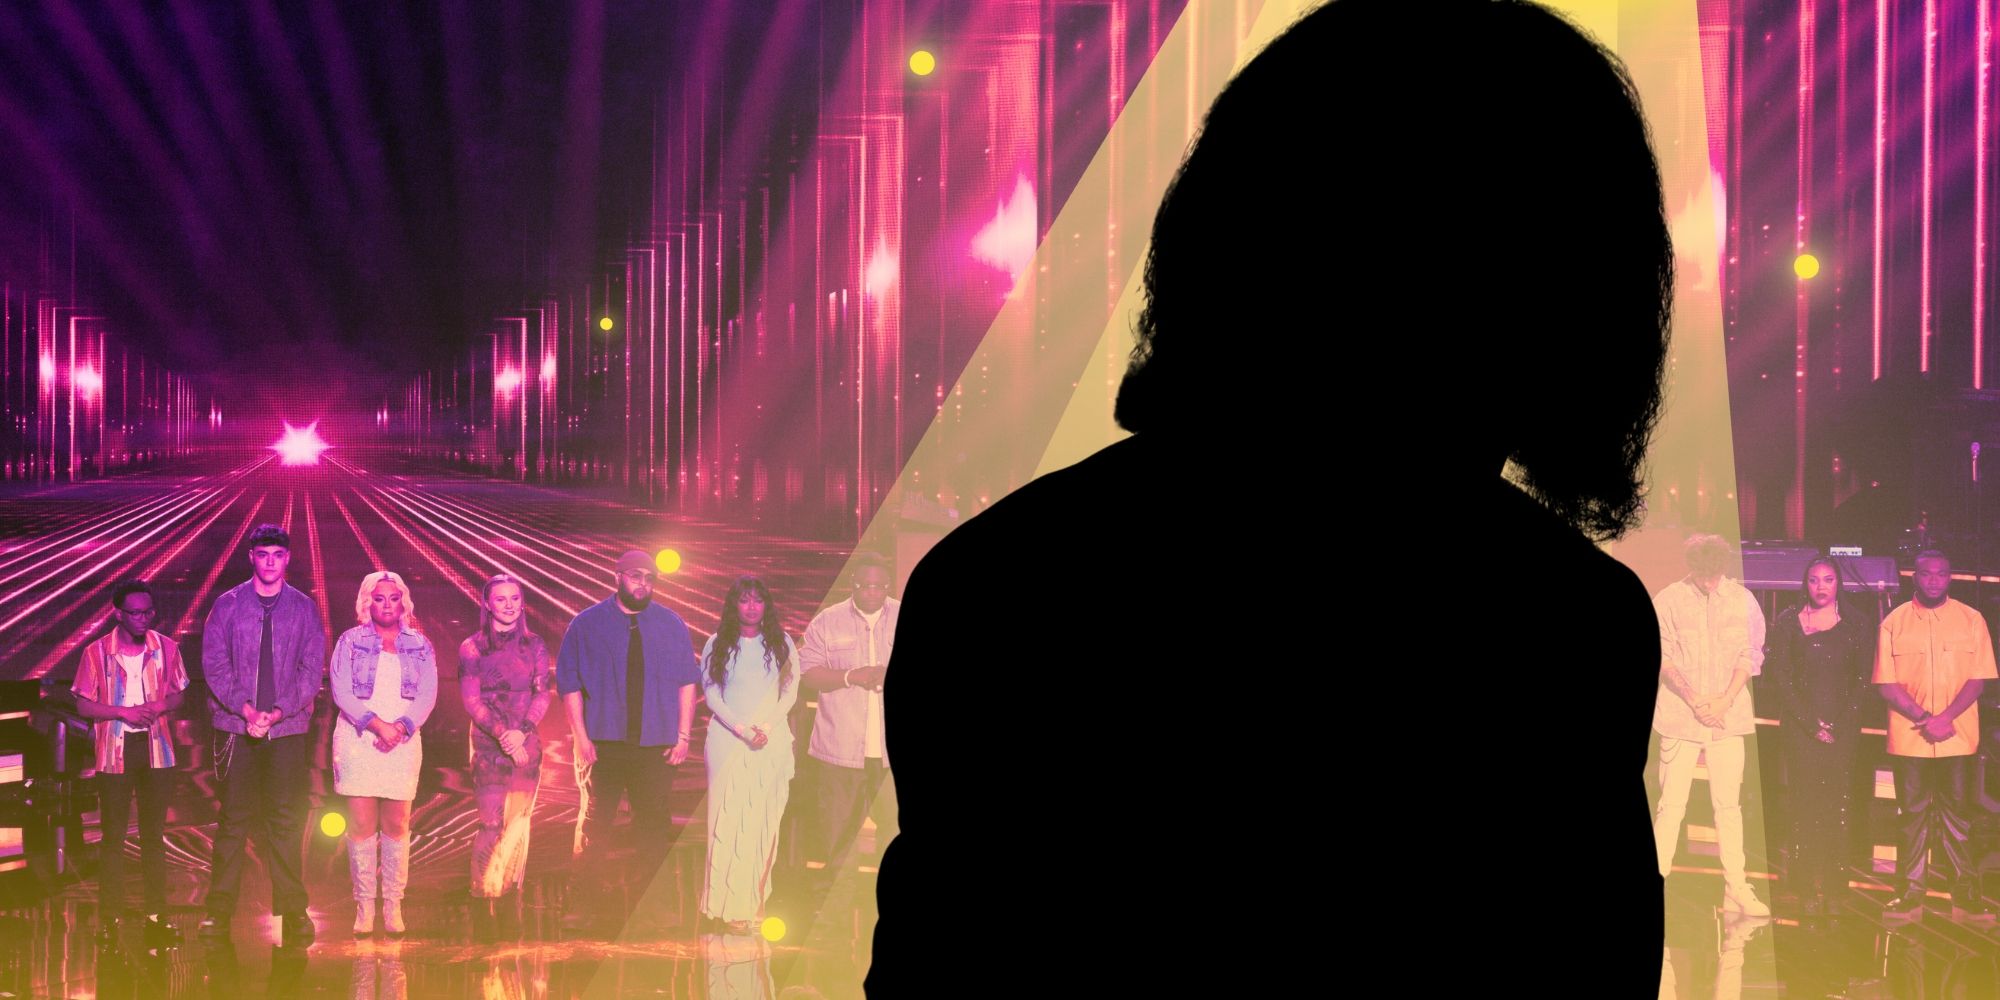 American Idol season 22 contestants lined up on stage with a silhouette of Gene Simmons